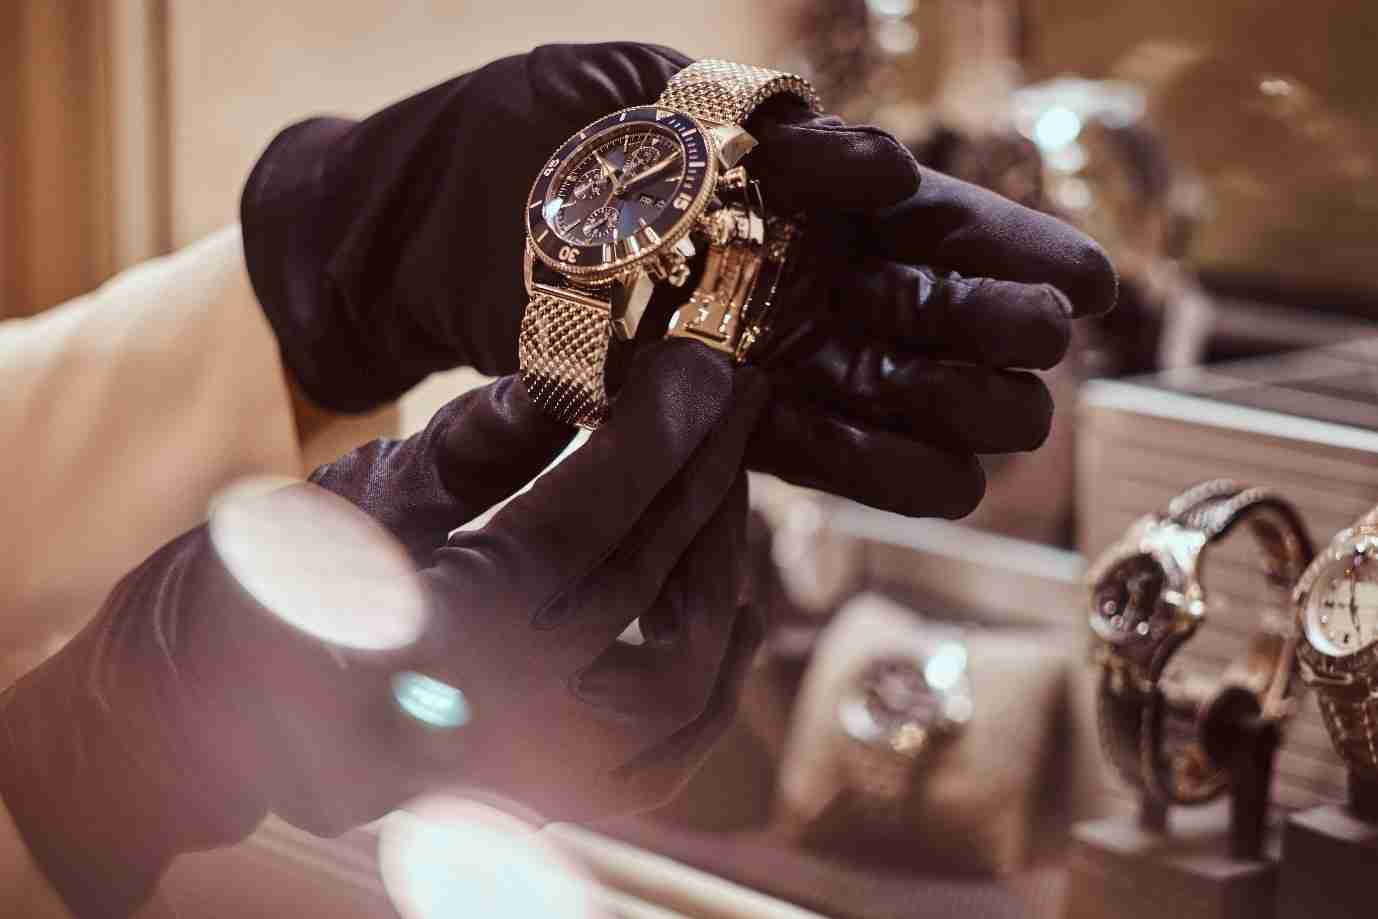  5 Branded Watches That Don't Cost a Bomb